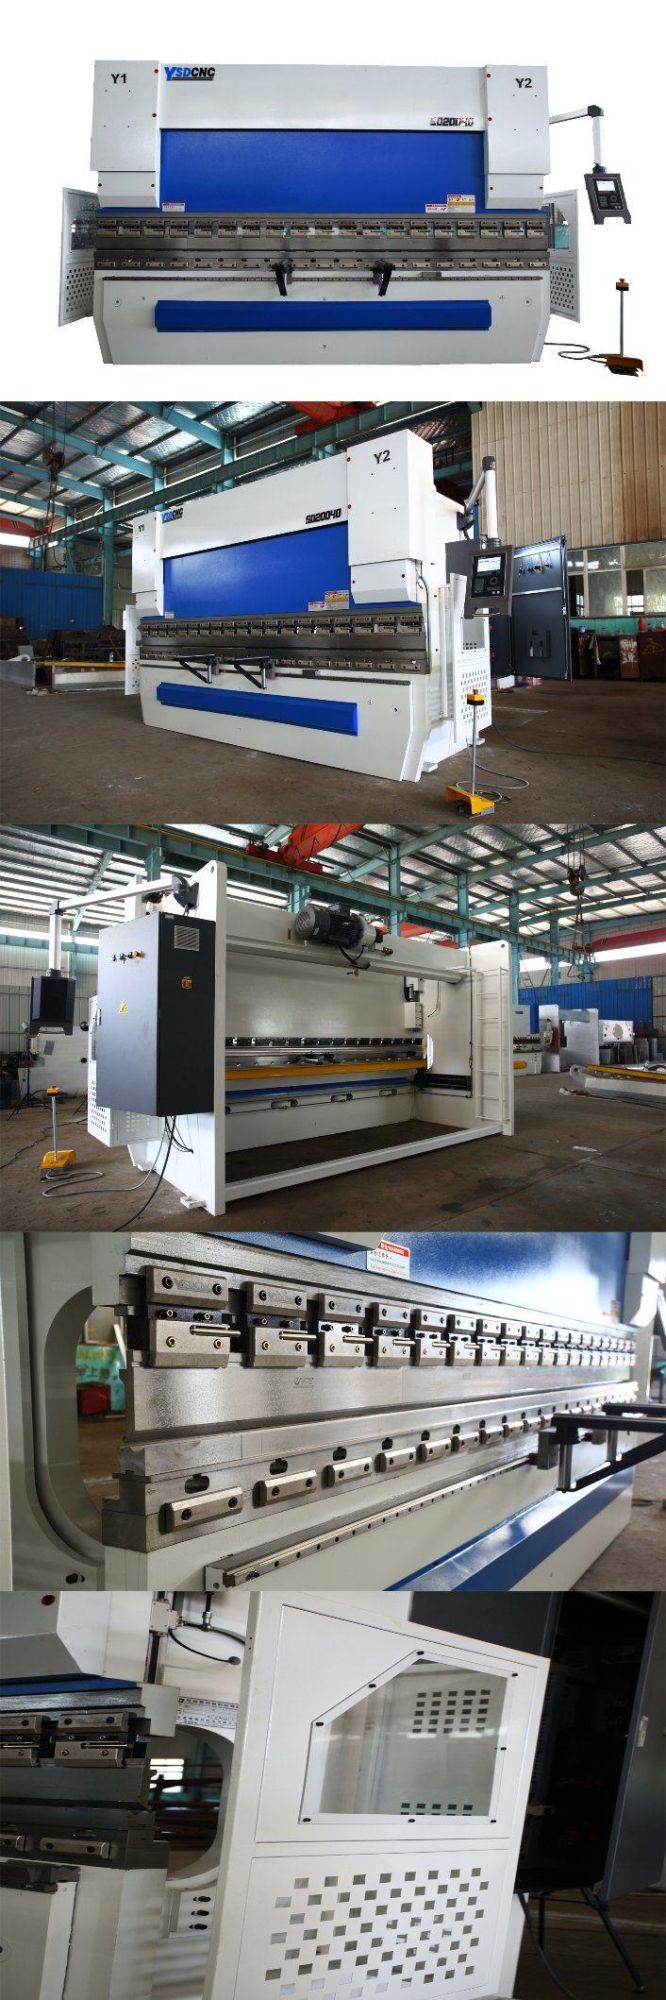 CNC Hydraulic Plate Bending Machine with Da66t System 4+1 Axis